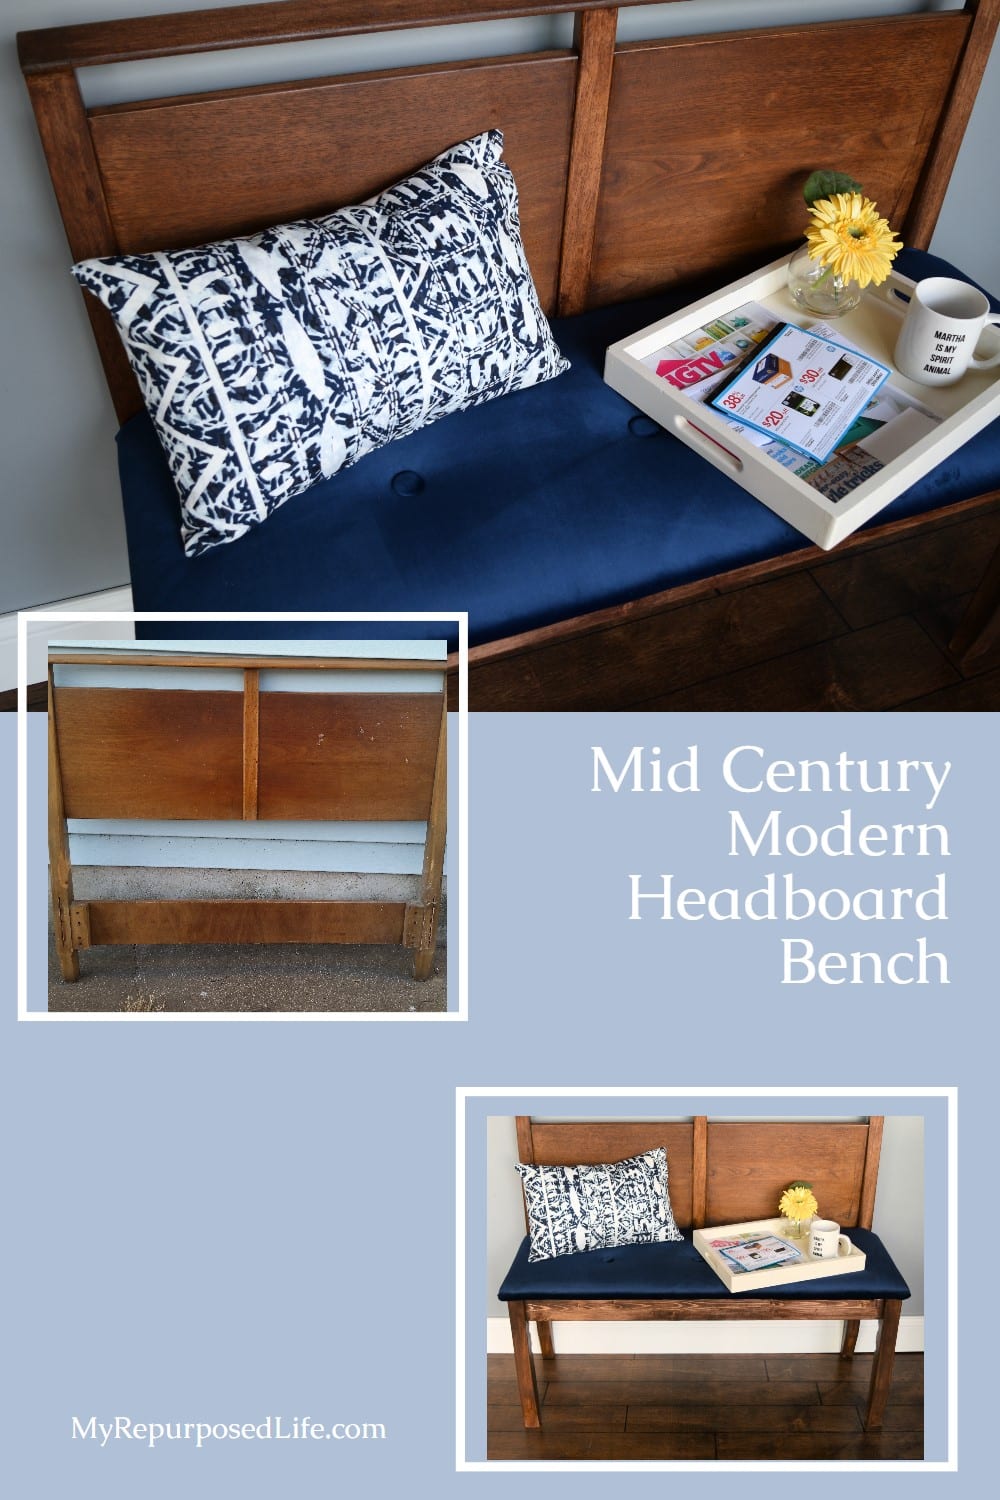 How to make a unique headboard bench from a mid century modern style bed. Step by step directions to do it yourself. Tips on upholstery. #MyRepurposedLife #headboard #bench via @repurposedlife